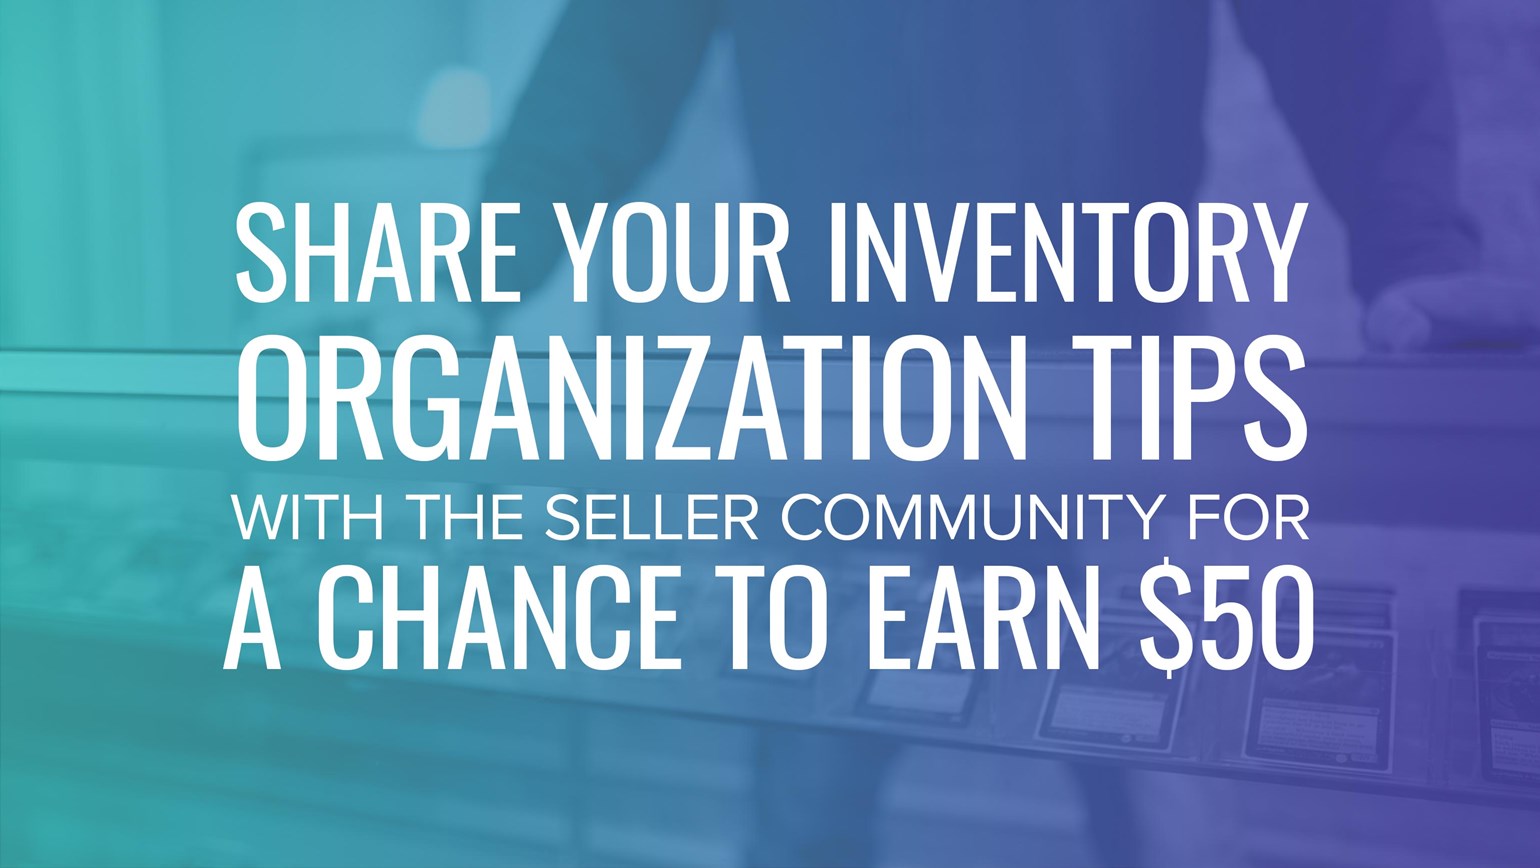 Share Your Inventory Organization Tips with the Seller Community for a Chance to Earn $50